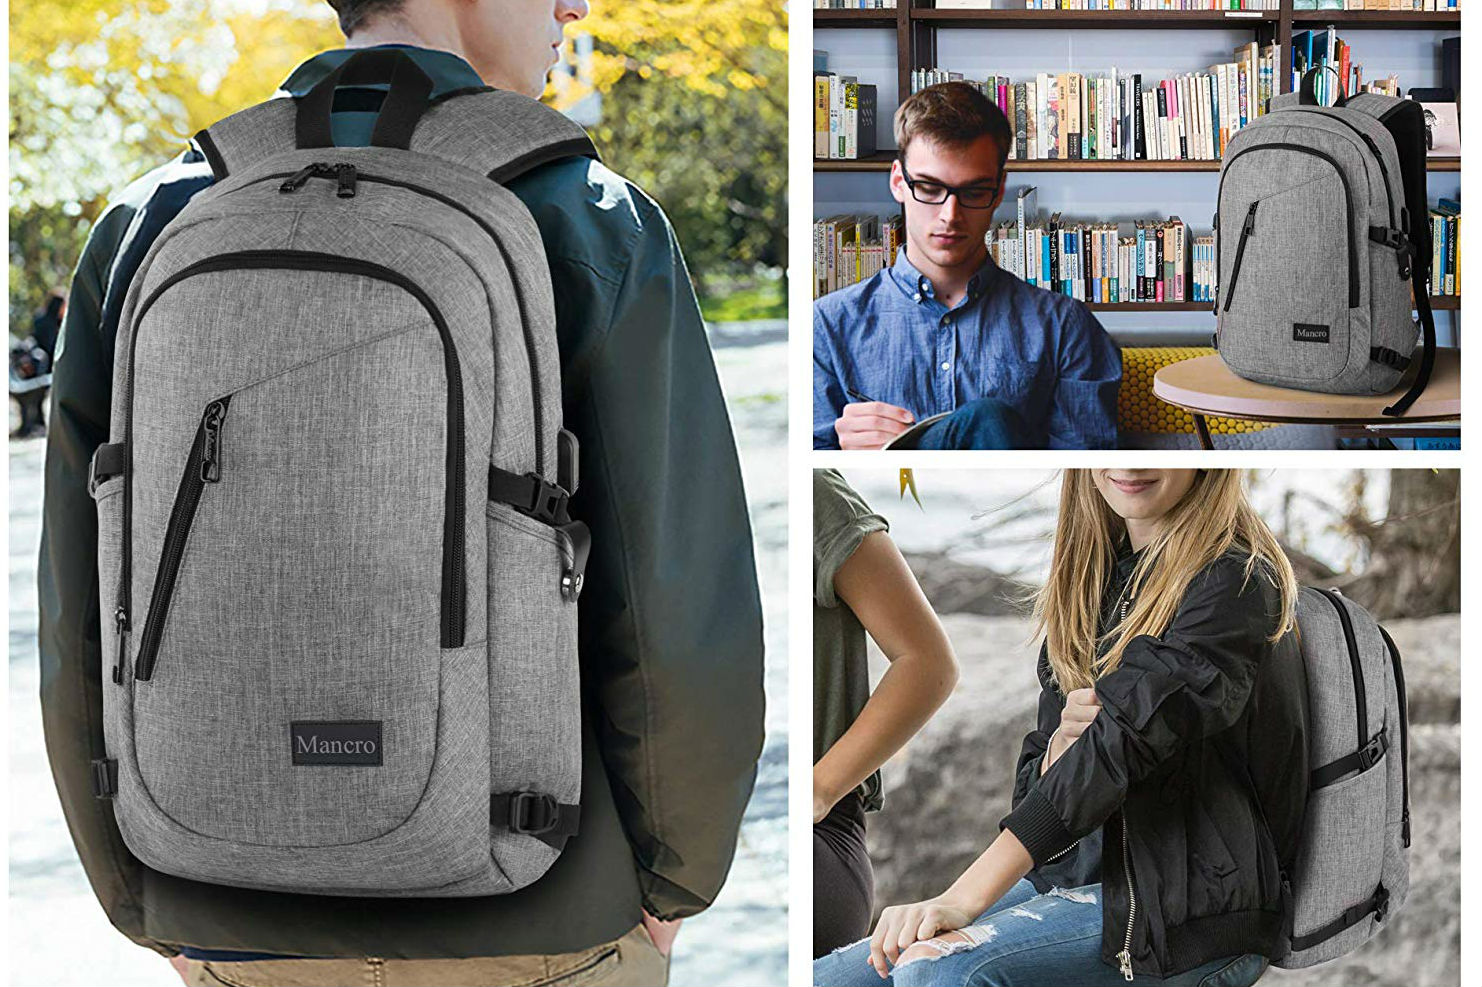 The 10 best laptop bags for your working week